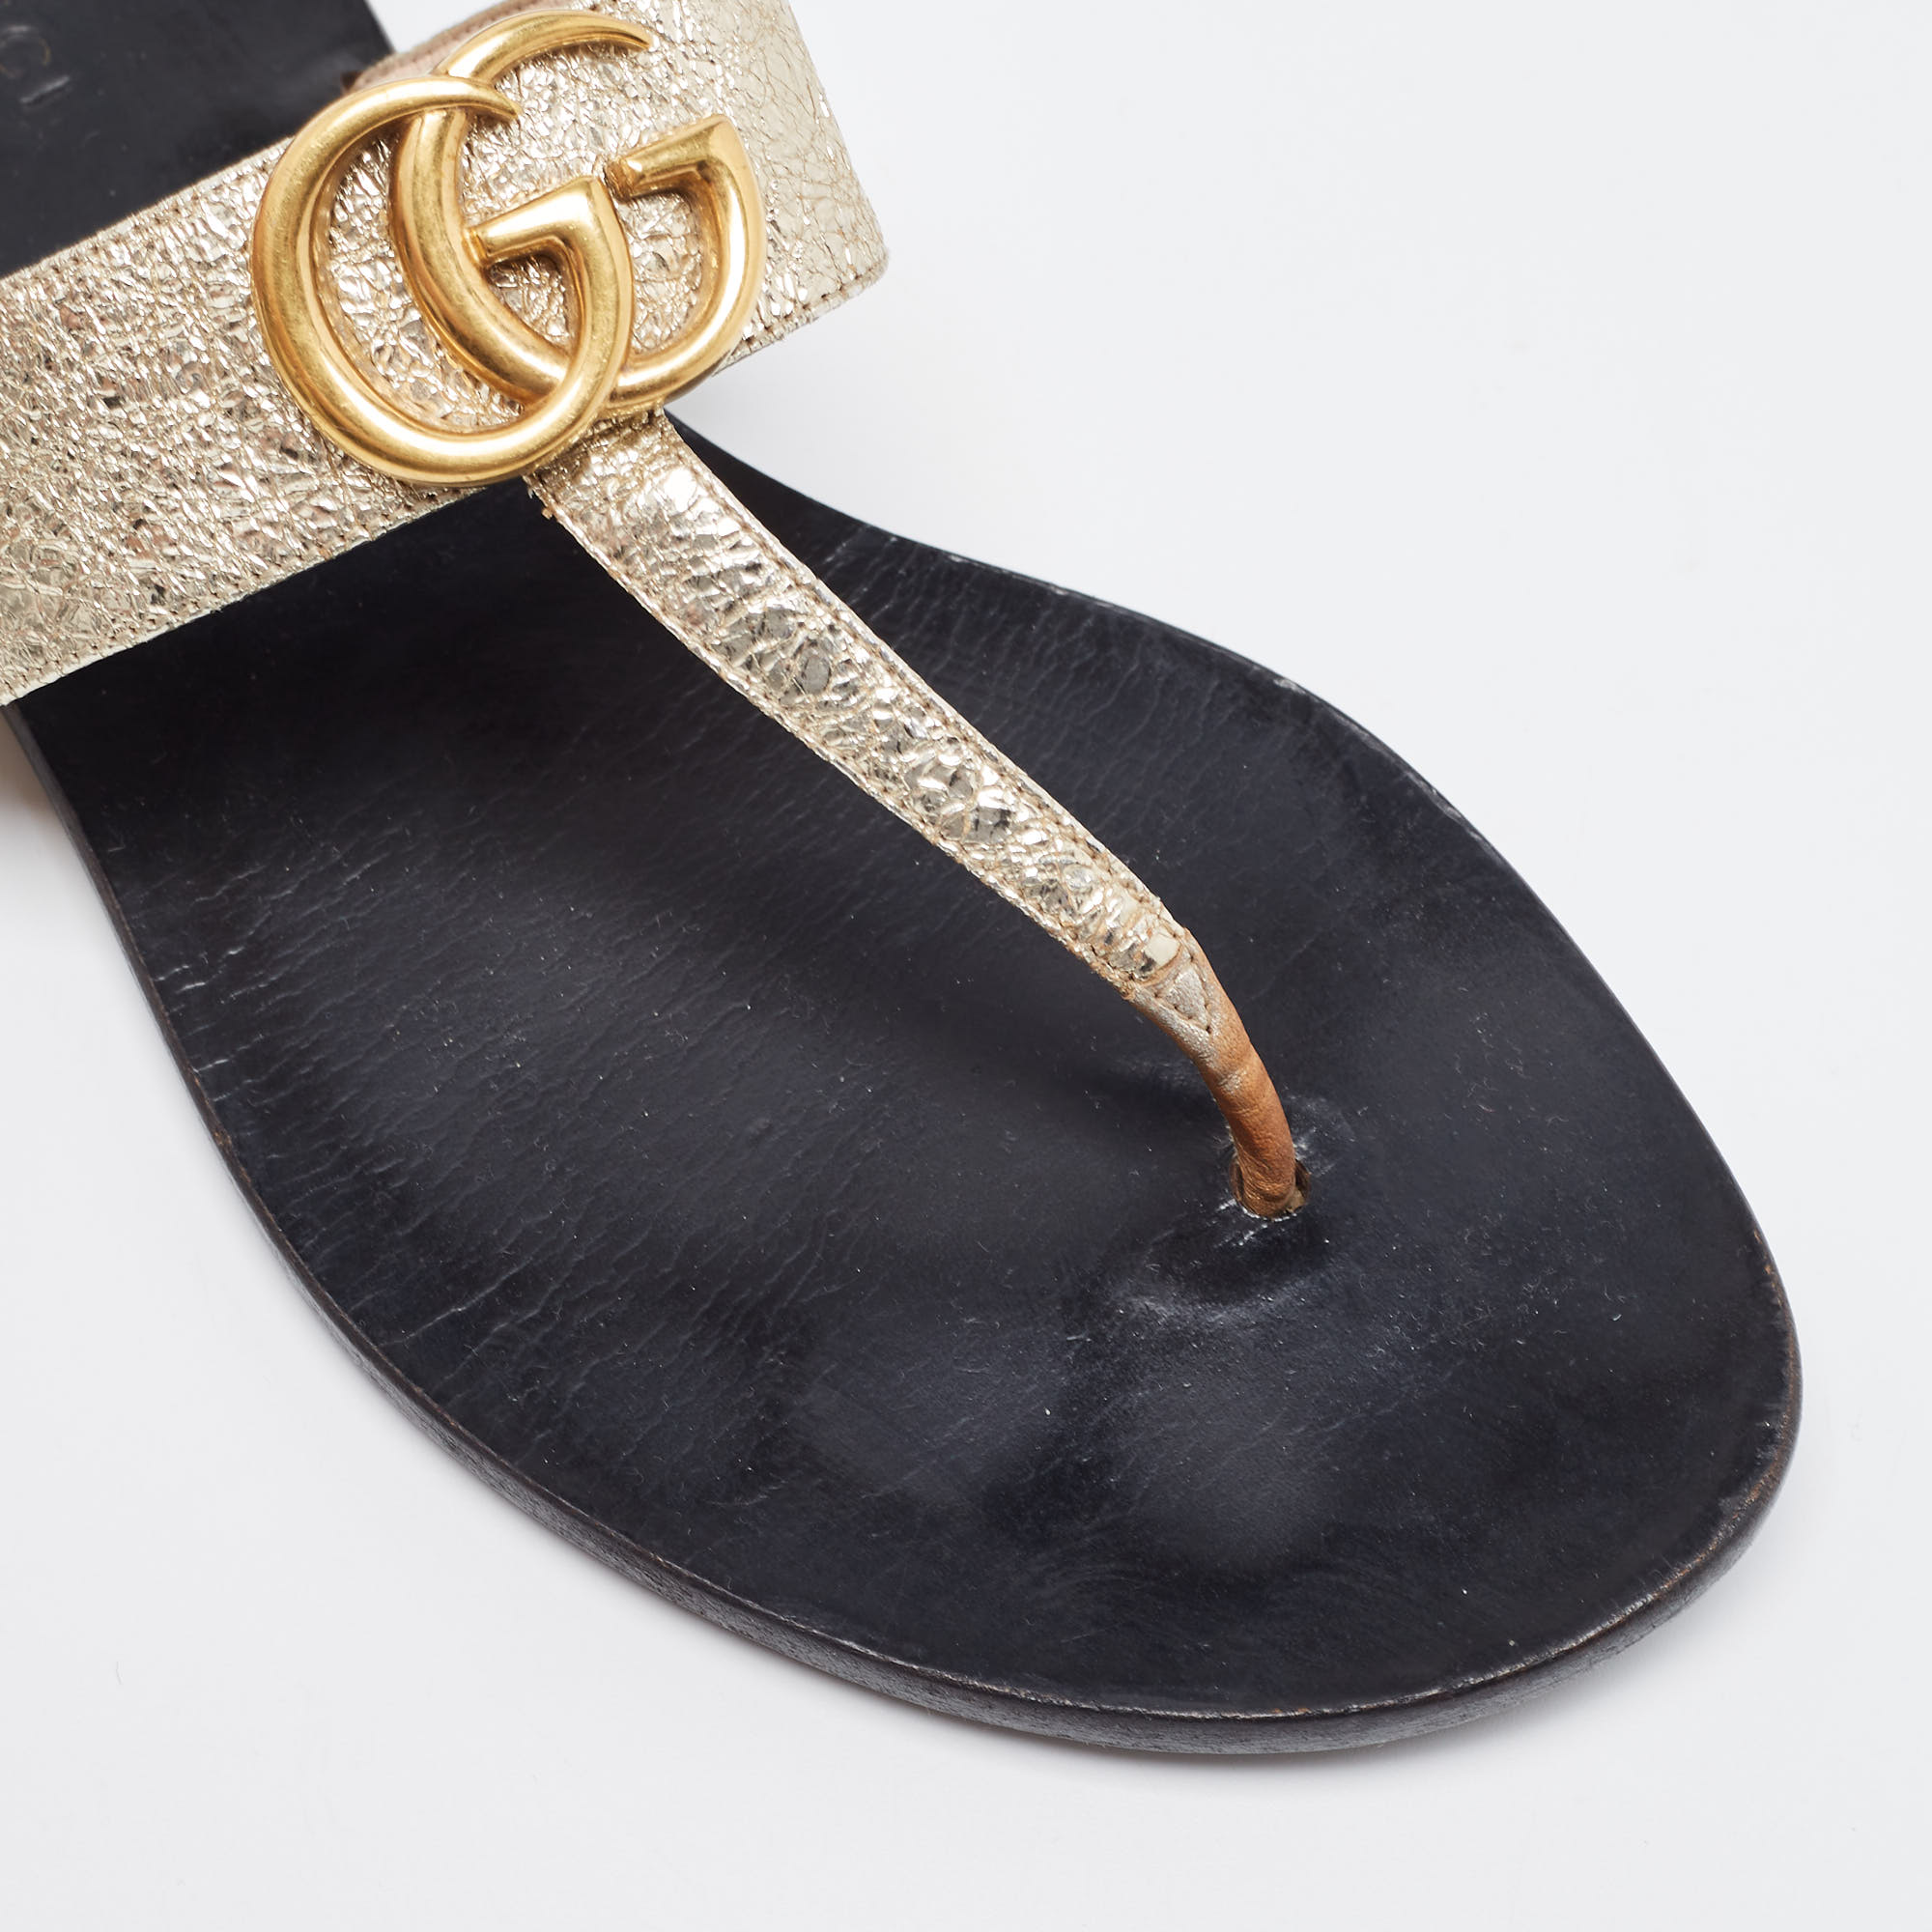 Gucci Gold Crinkled Leather GG Marmont Thong Flats Size 37.5